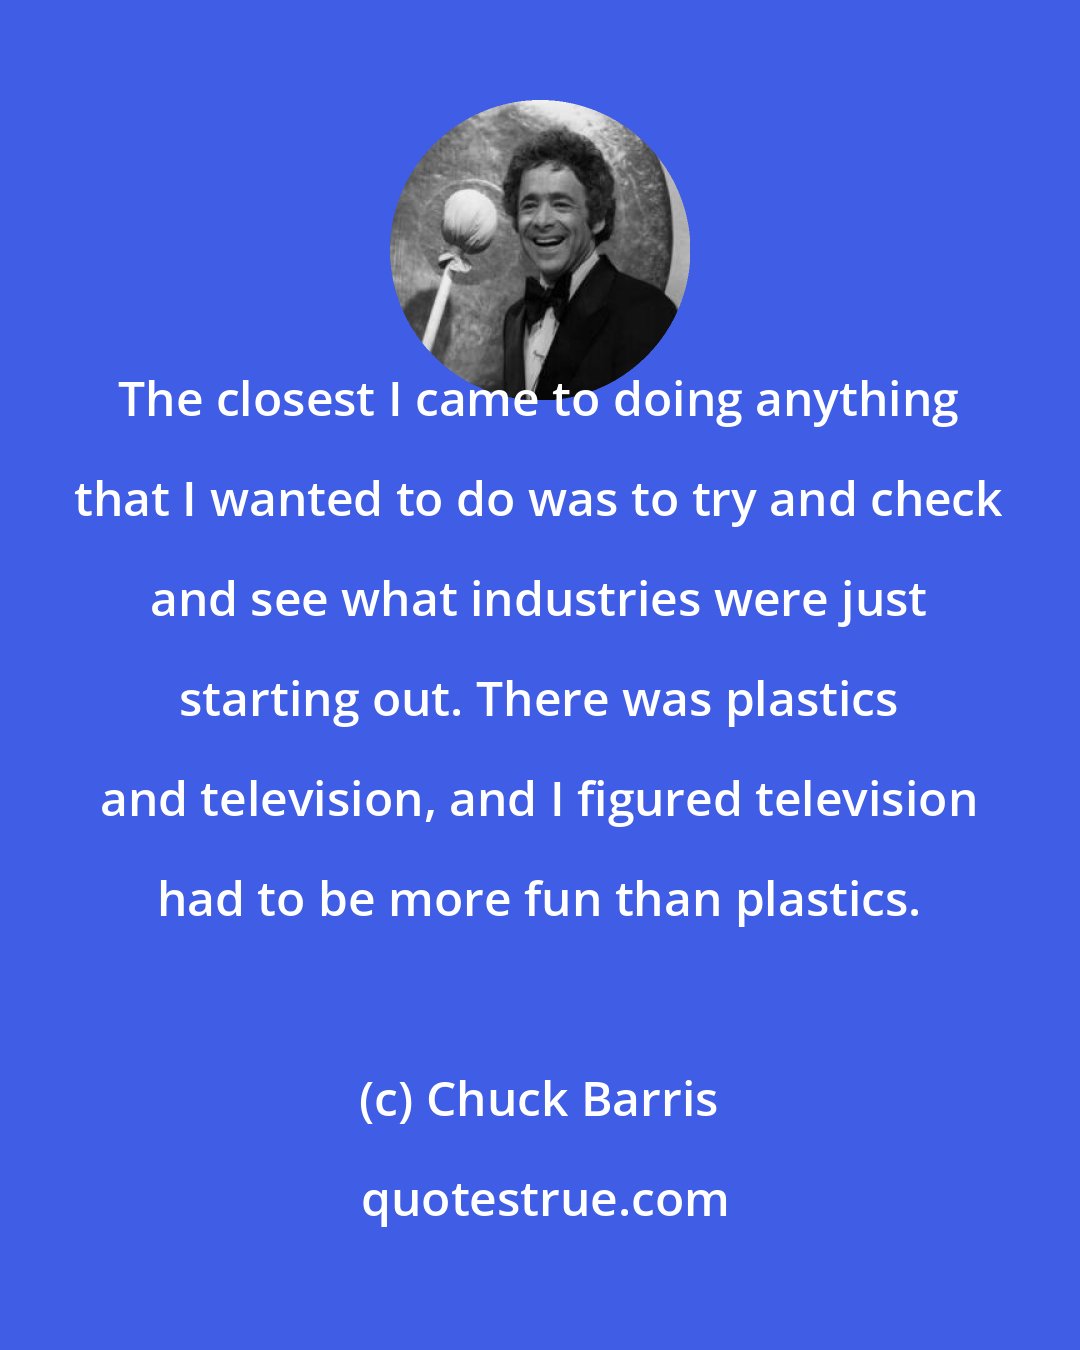 Chuck Barris: The closest I came to doing anything that I wanted to do was to try and check and see what industries were just starting out. There was plastics and television, and I figured television had to be more fun than plastics.